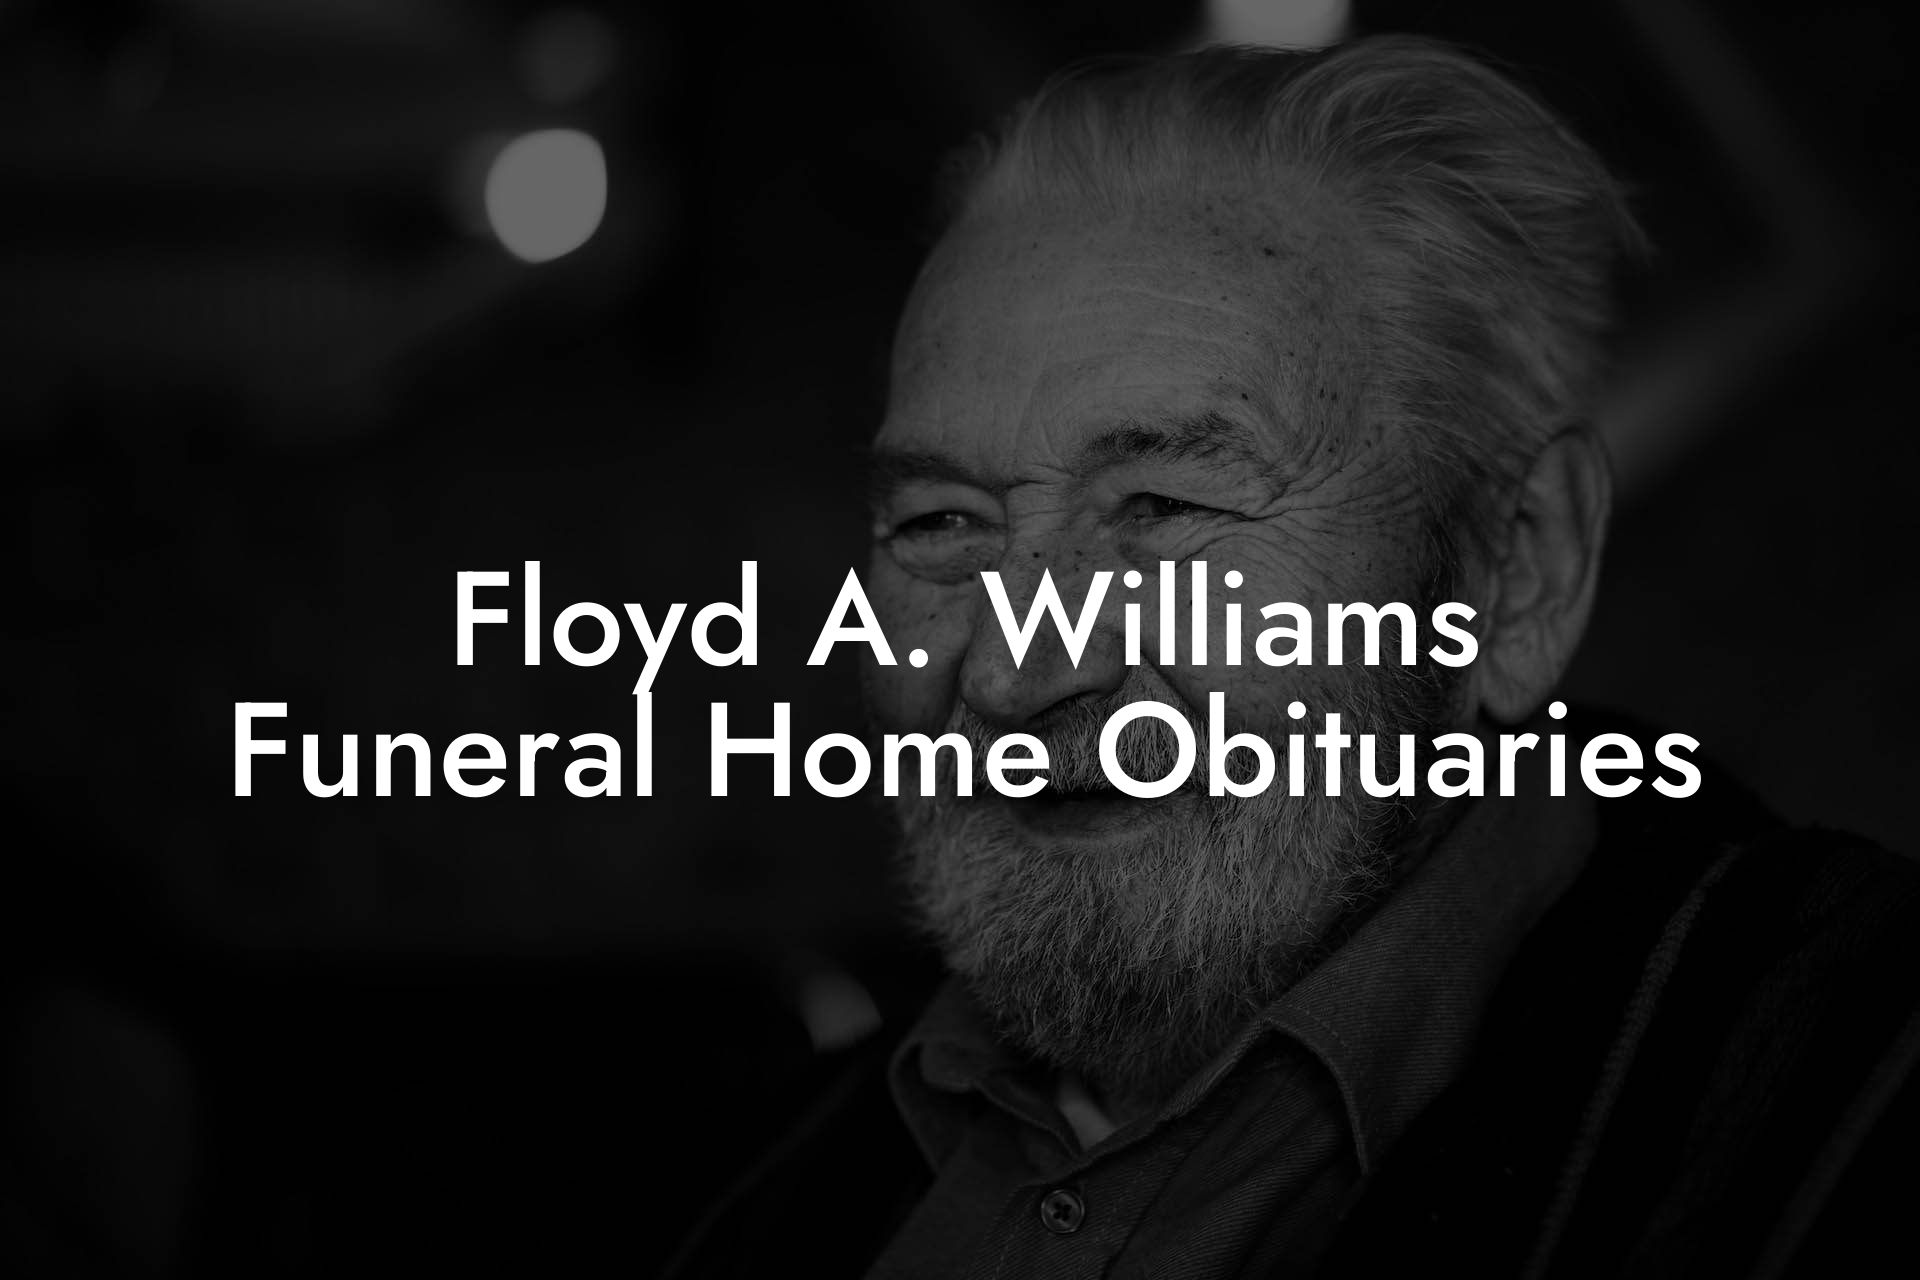 Floyd A. Williams Funeral Home Obituaries